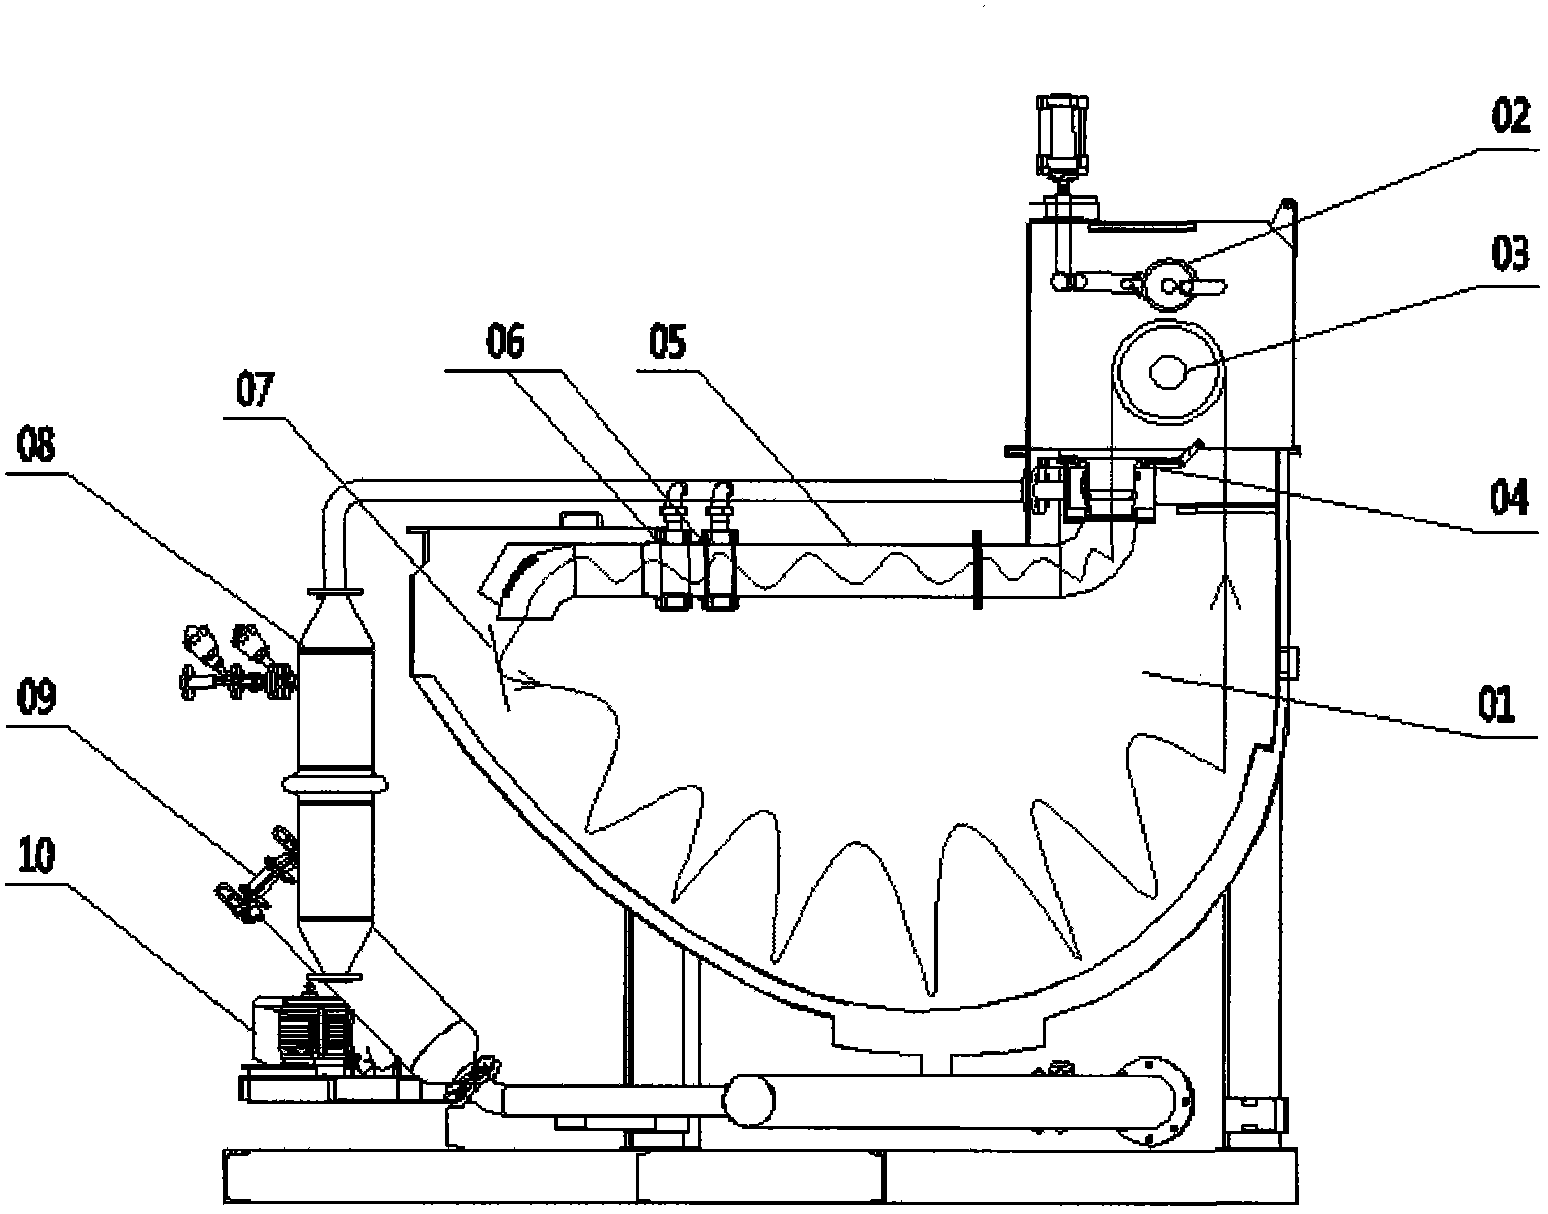 Continuous rope-shaped jet washing machine